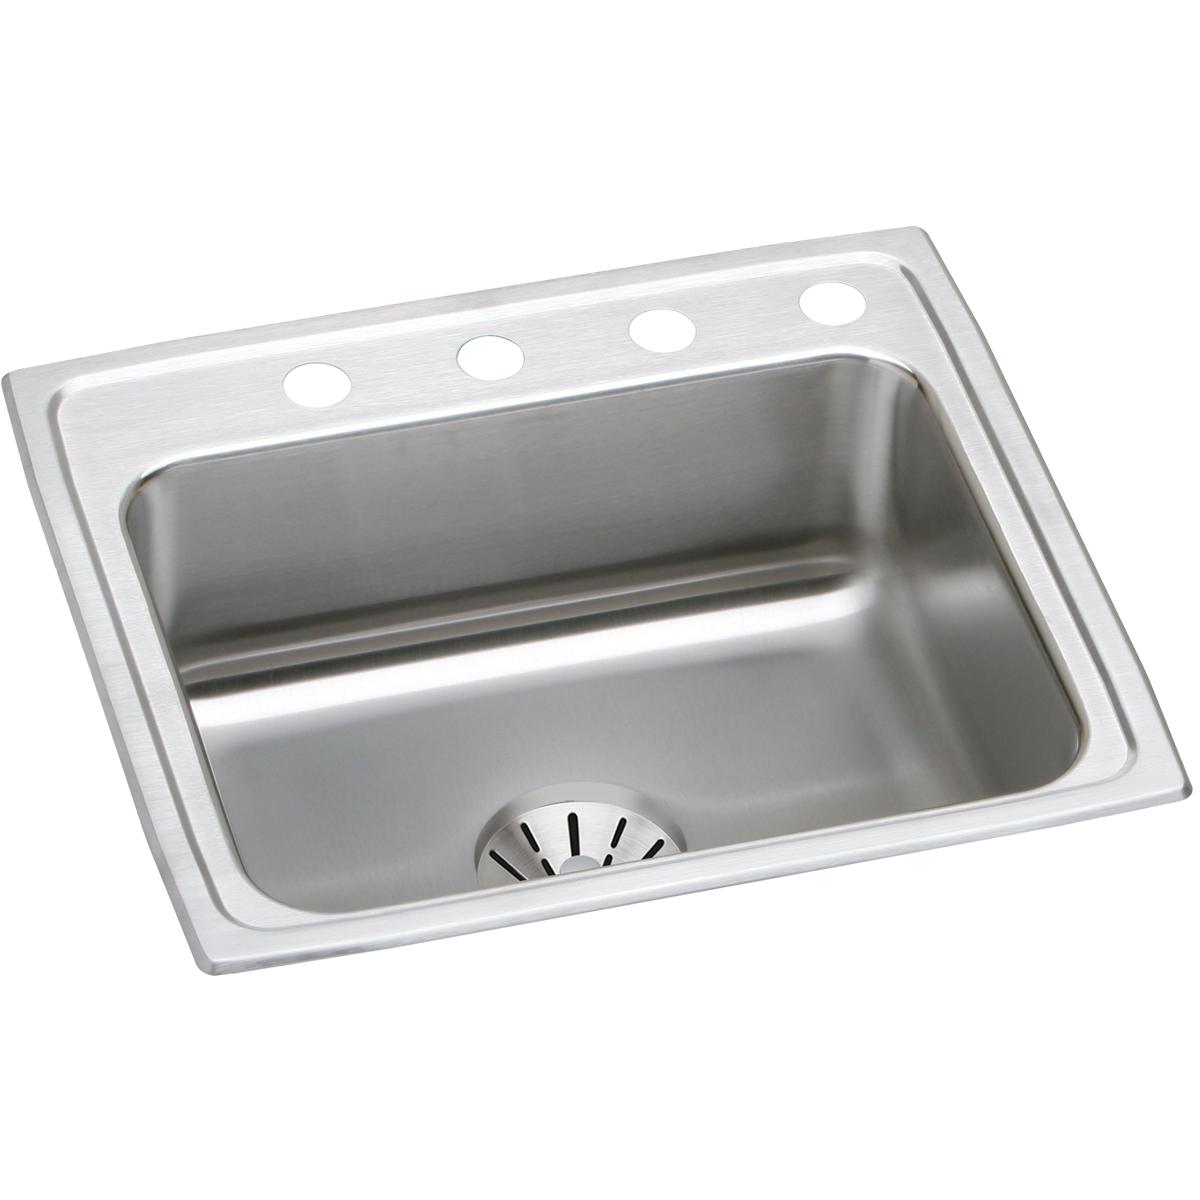 Elkay Lustertone Classic Stainless Steel 22" x 19-1/2" x 10-1/8" Single Bowl Drop-in Sink with Perfect Drain